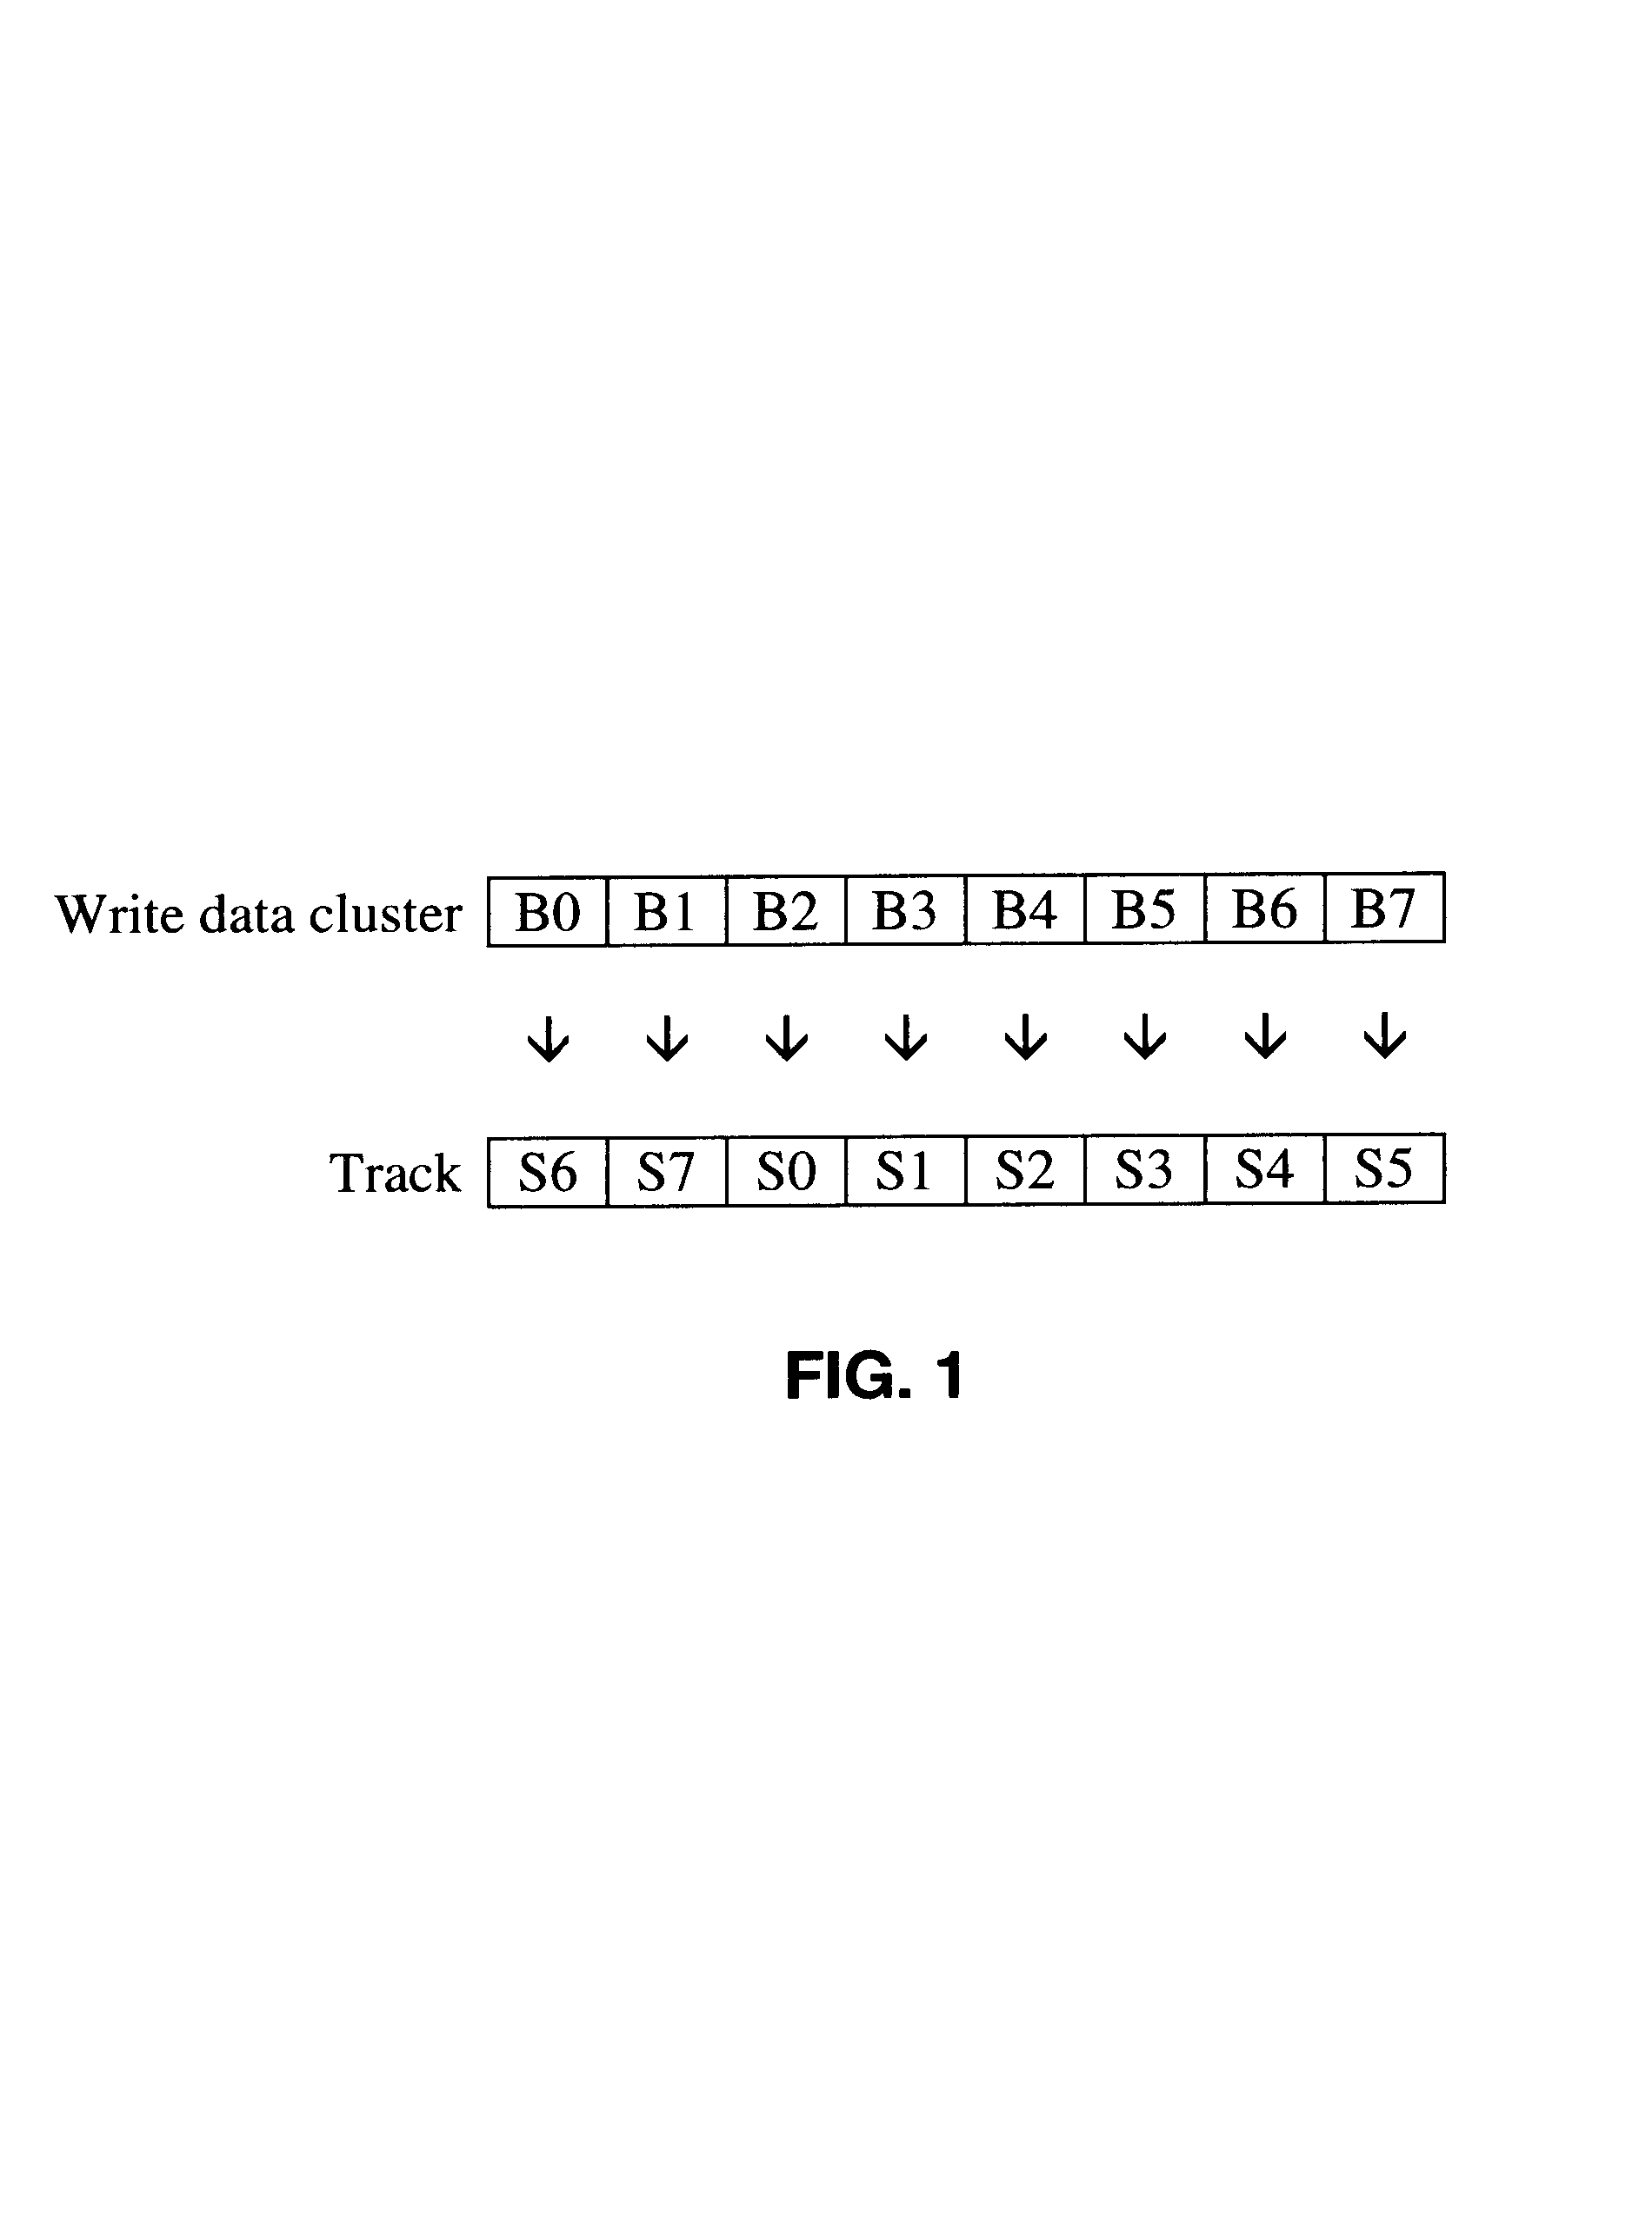 Method for writing streaming audiovisual data to a disk drive